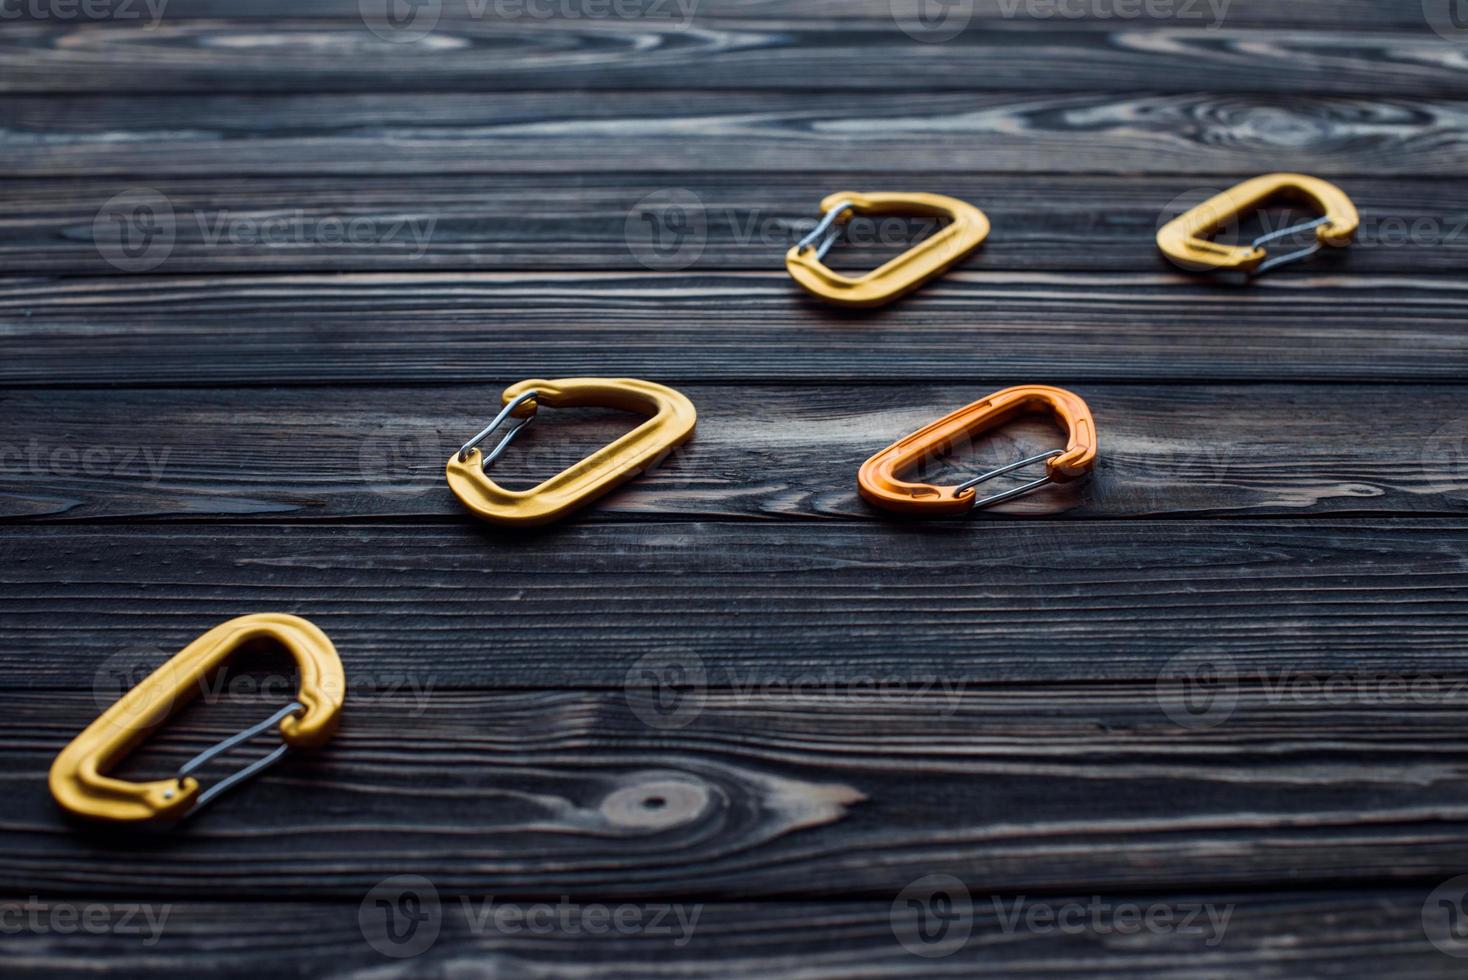 Take it for you extreme weekend activities. Isolated photo of climbing equipment. Parts of carabiners lying on the wooden table